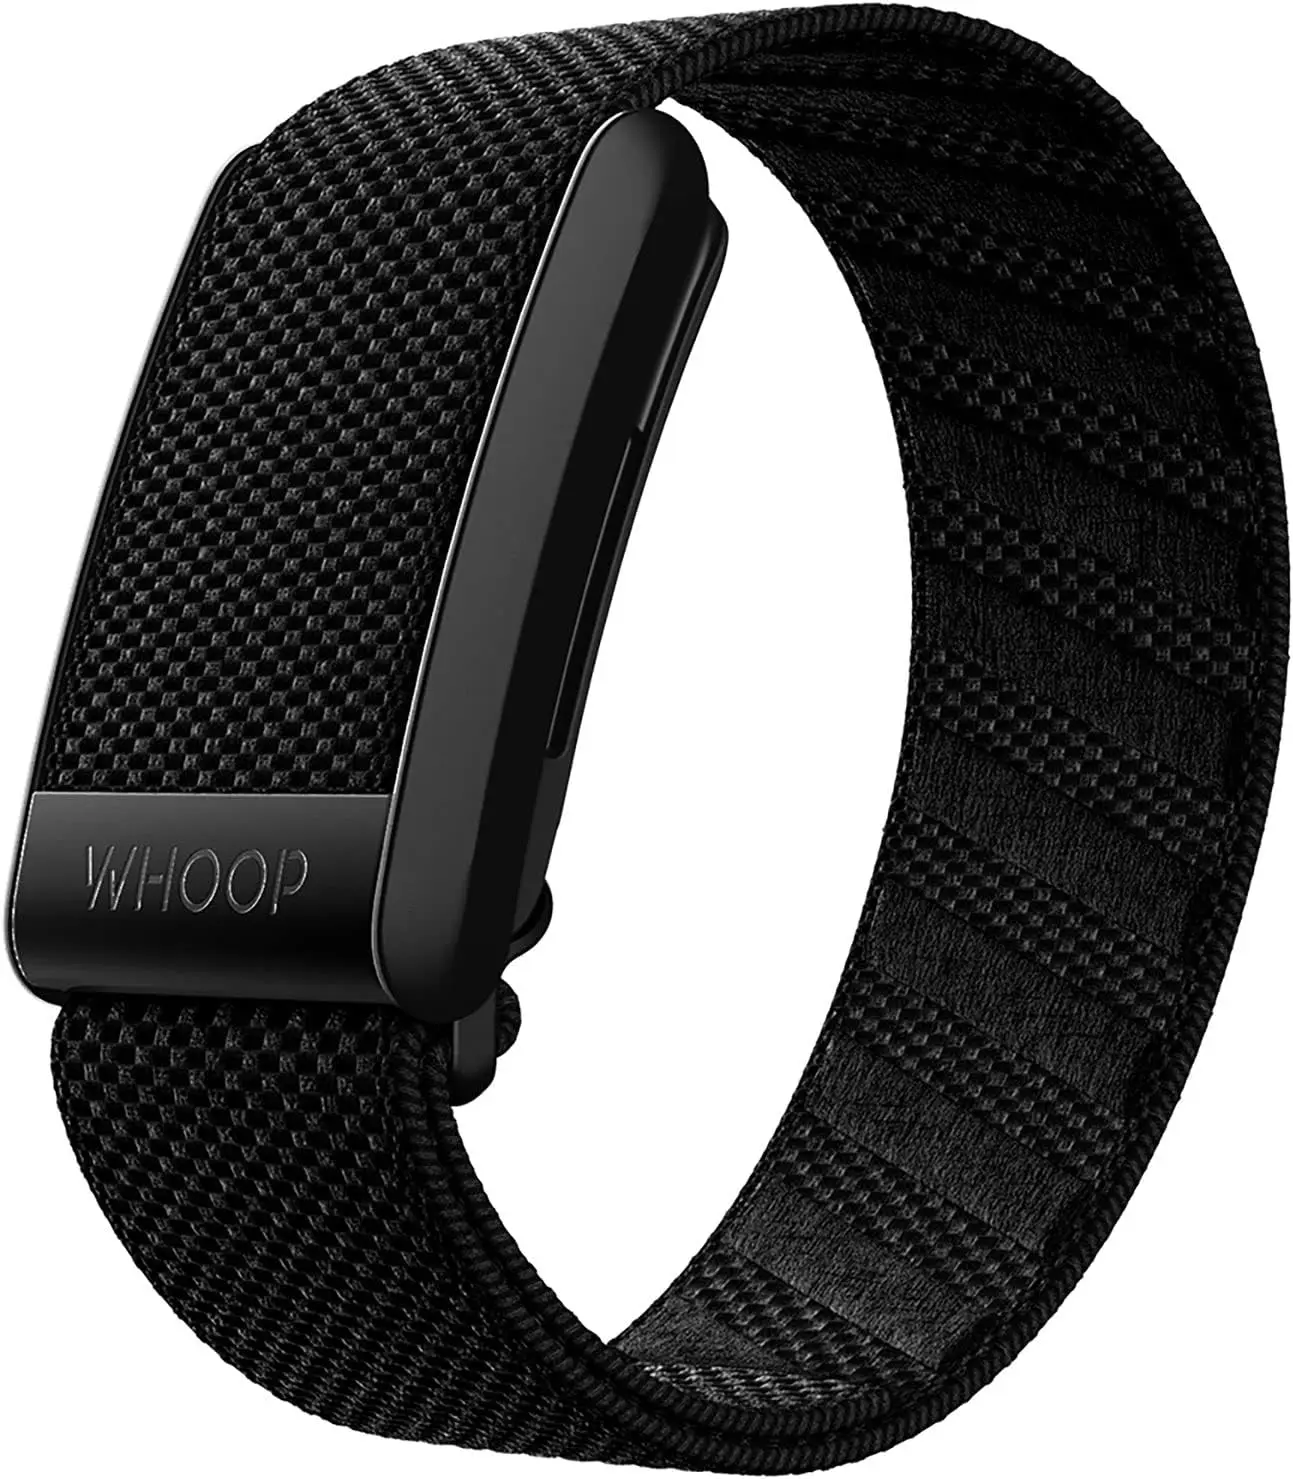 

4.0 with 12 Month Subscription \u2013 Wearable Health, Fitness & Activity Tracker \u2013 Continuous Monitoring, Performance